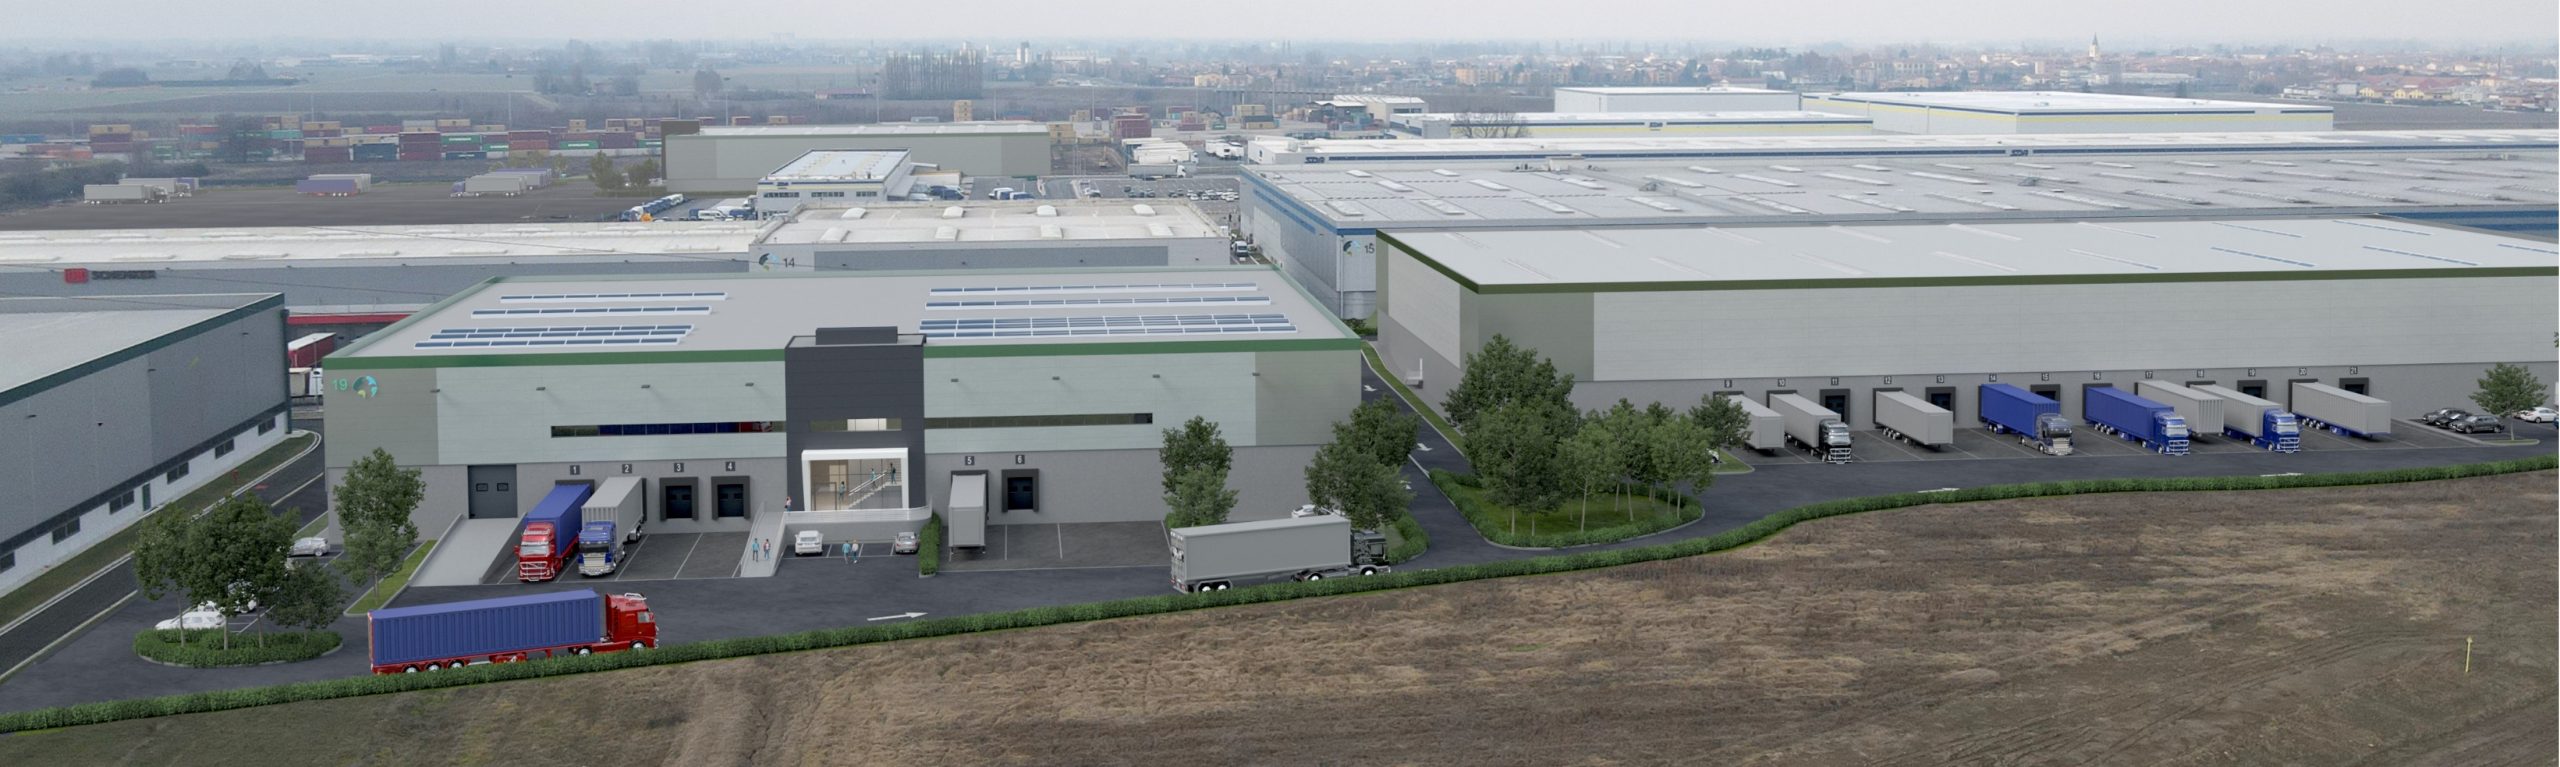 GSE ITALIA SIGNS THE THIRD PROJECT WITH PROLOGIS: CONSTRUCTION OF THREE LOGISTICS WAREHOUSES AT BOLOGNA FREIGHT VILLAGE